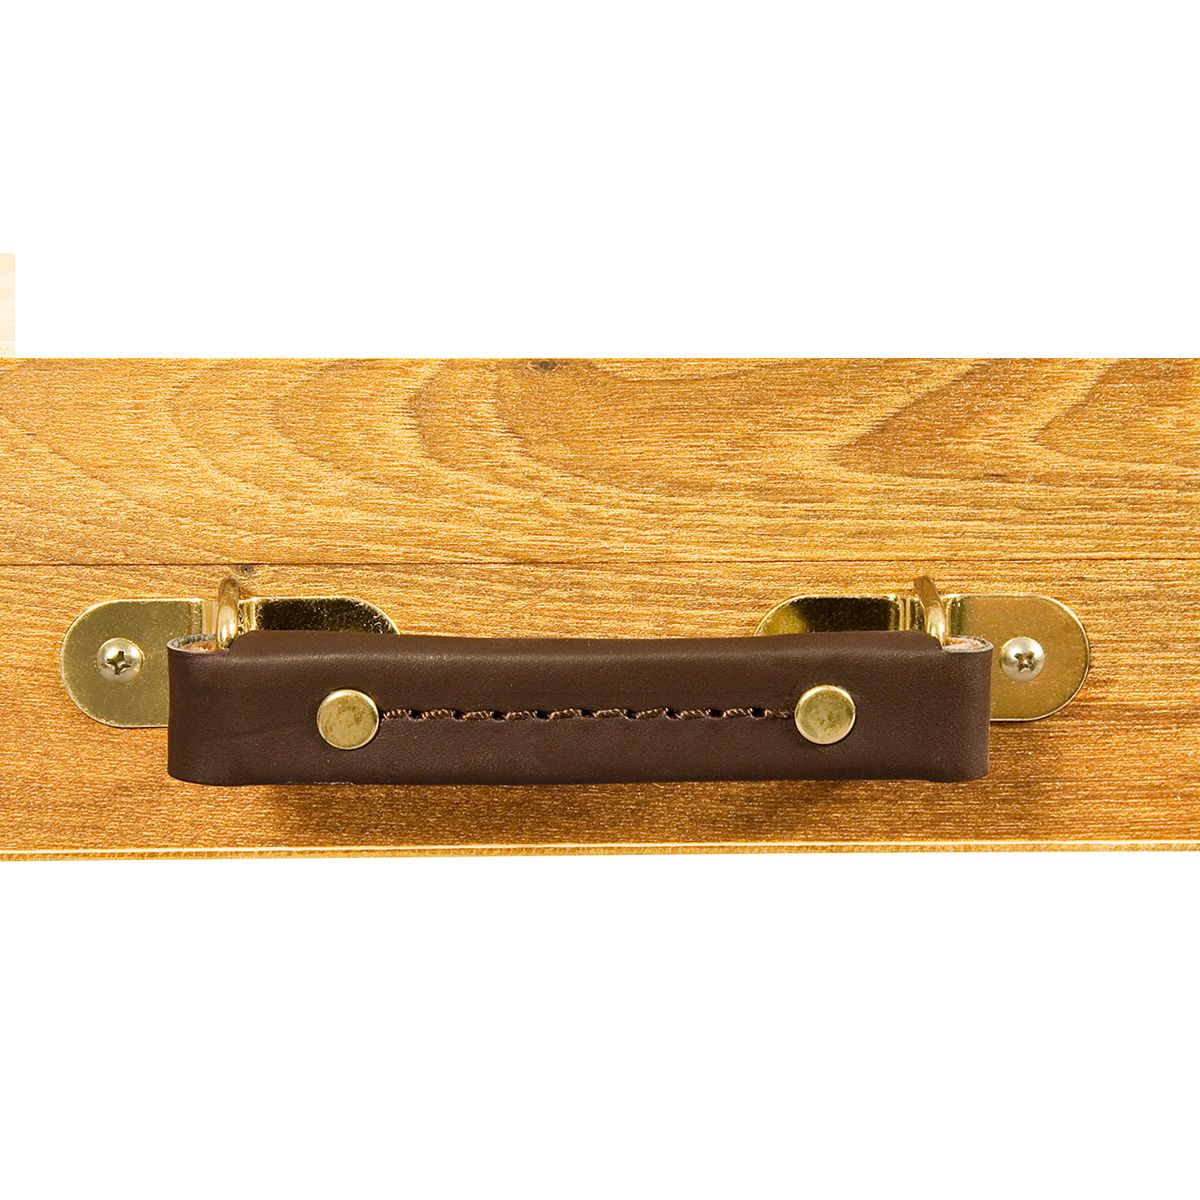 Sturdy brown leather handle (Capri oil stained box shown)